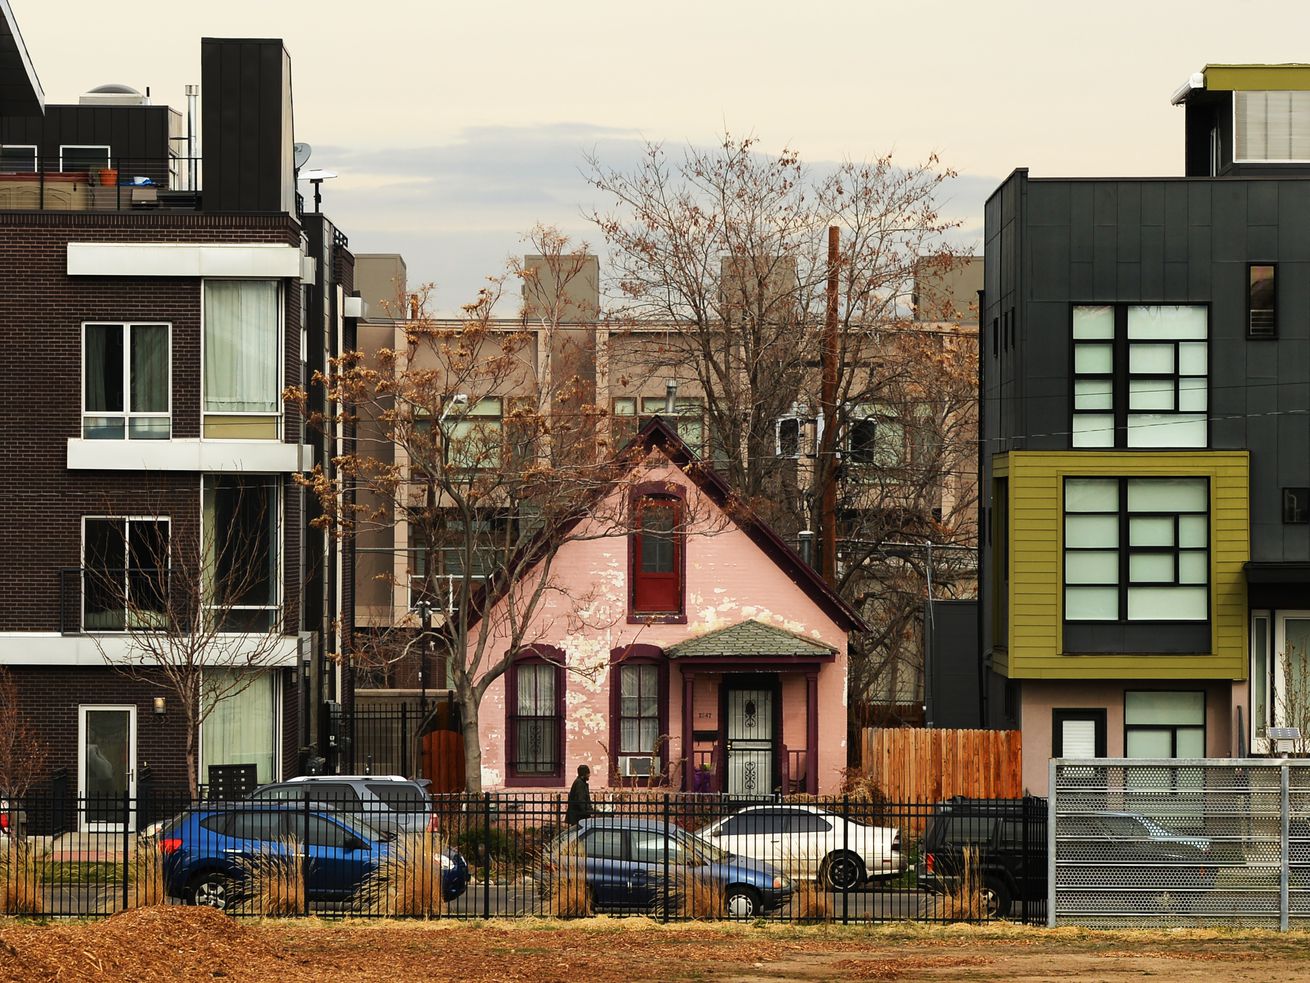 In defense of the “gentrification building”